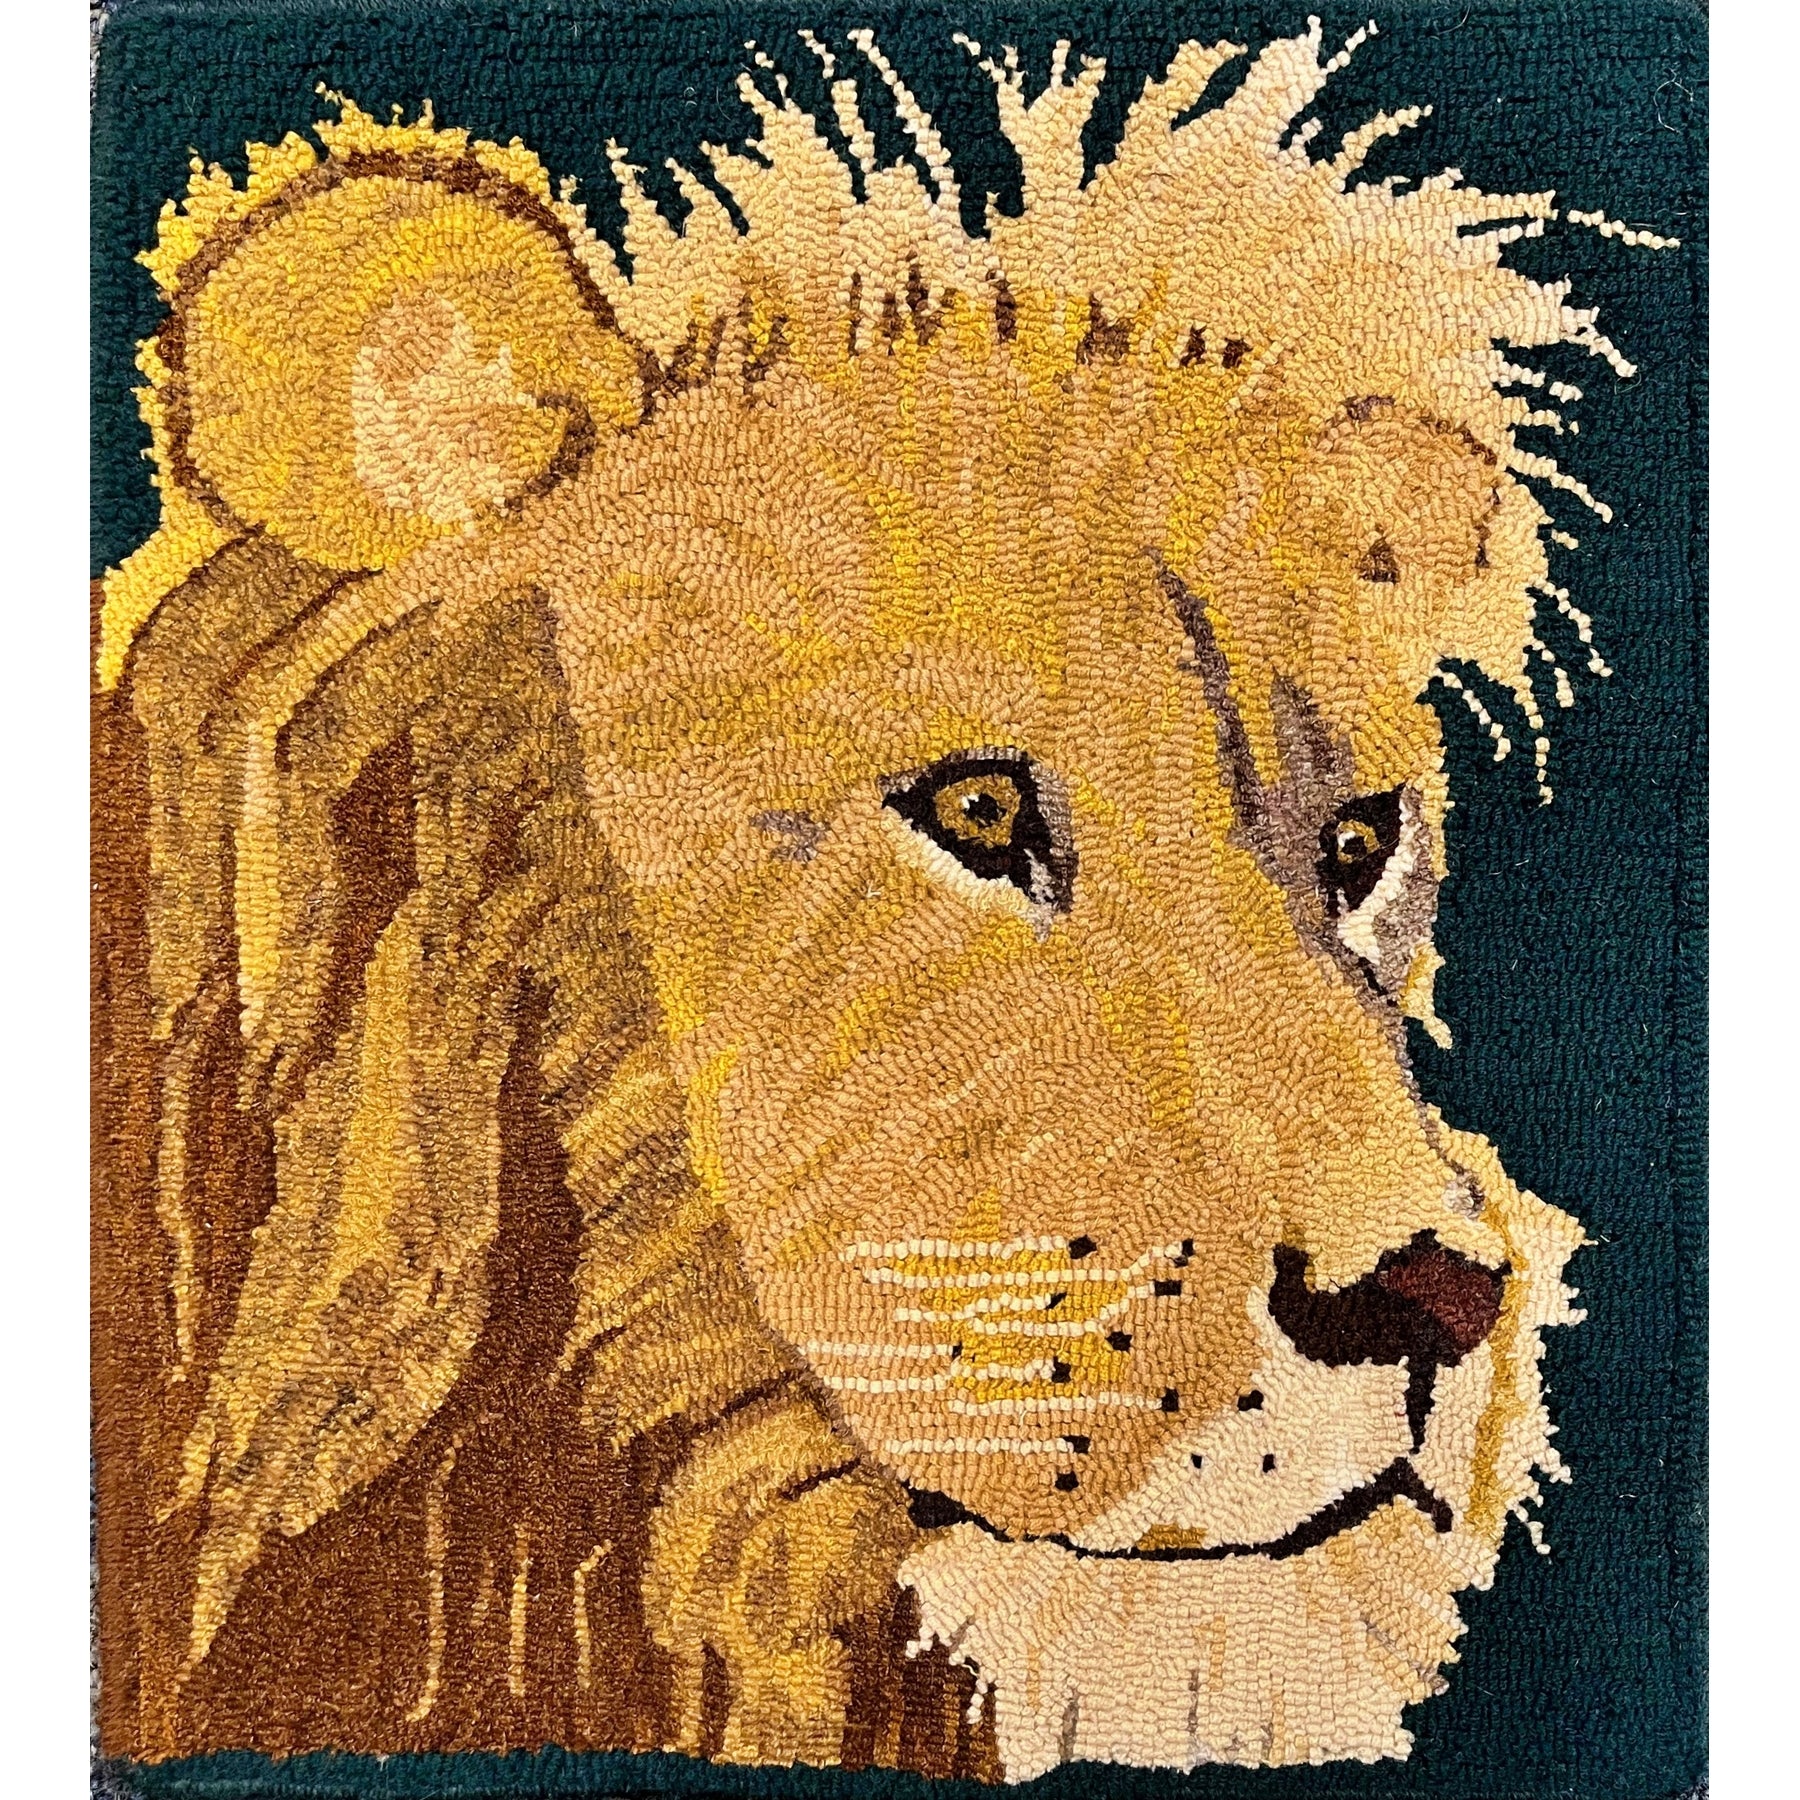 Sandy's Lion, rug hooked by Kathryn Kovaric